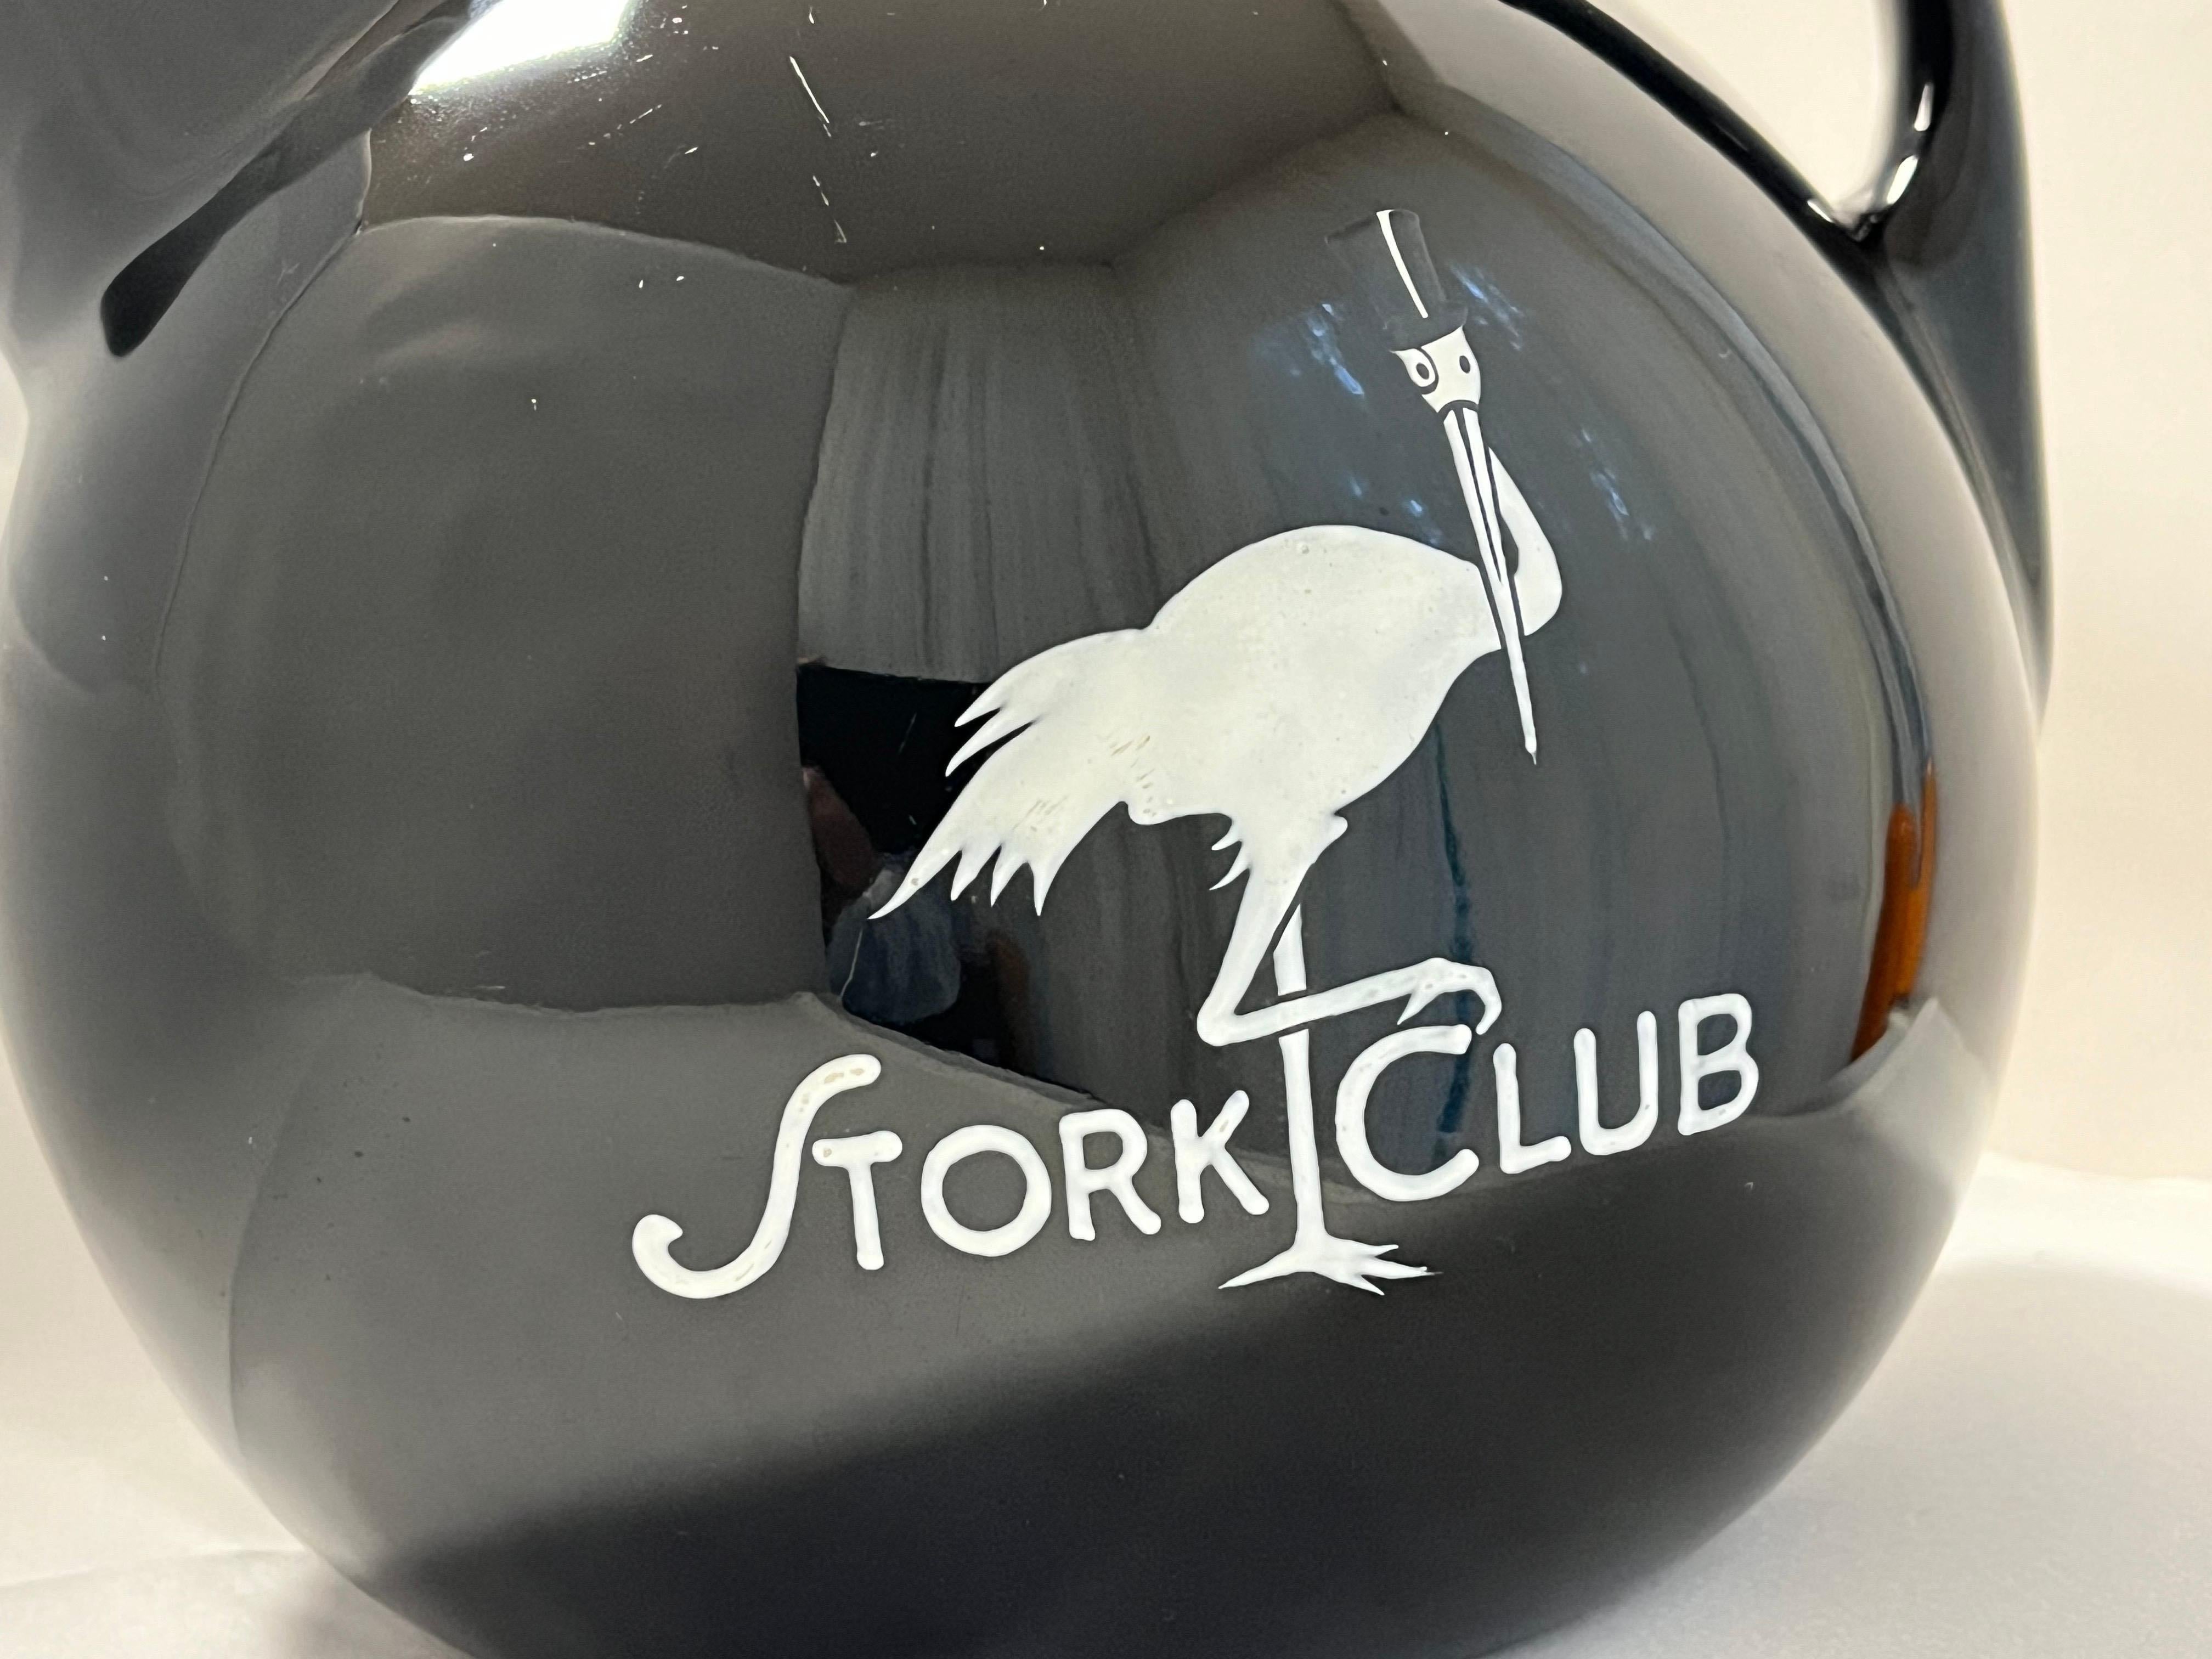 A vintage circa 1940's original Stork Club water pitcher made by the Hall China Company. This water pitcher features the Stork Club logo and name in white on both sides of the high gloss finished water pitcher. Featuring a handle and spout, the